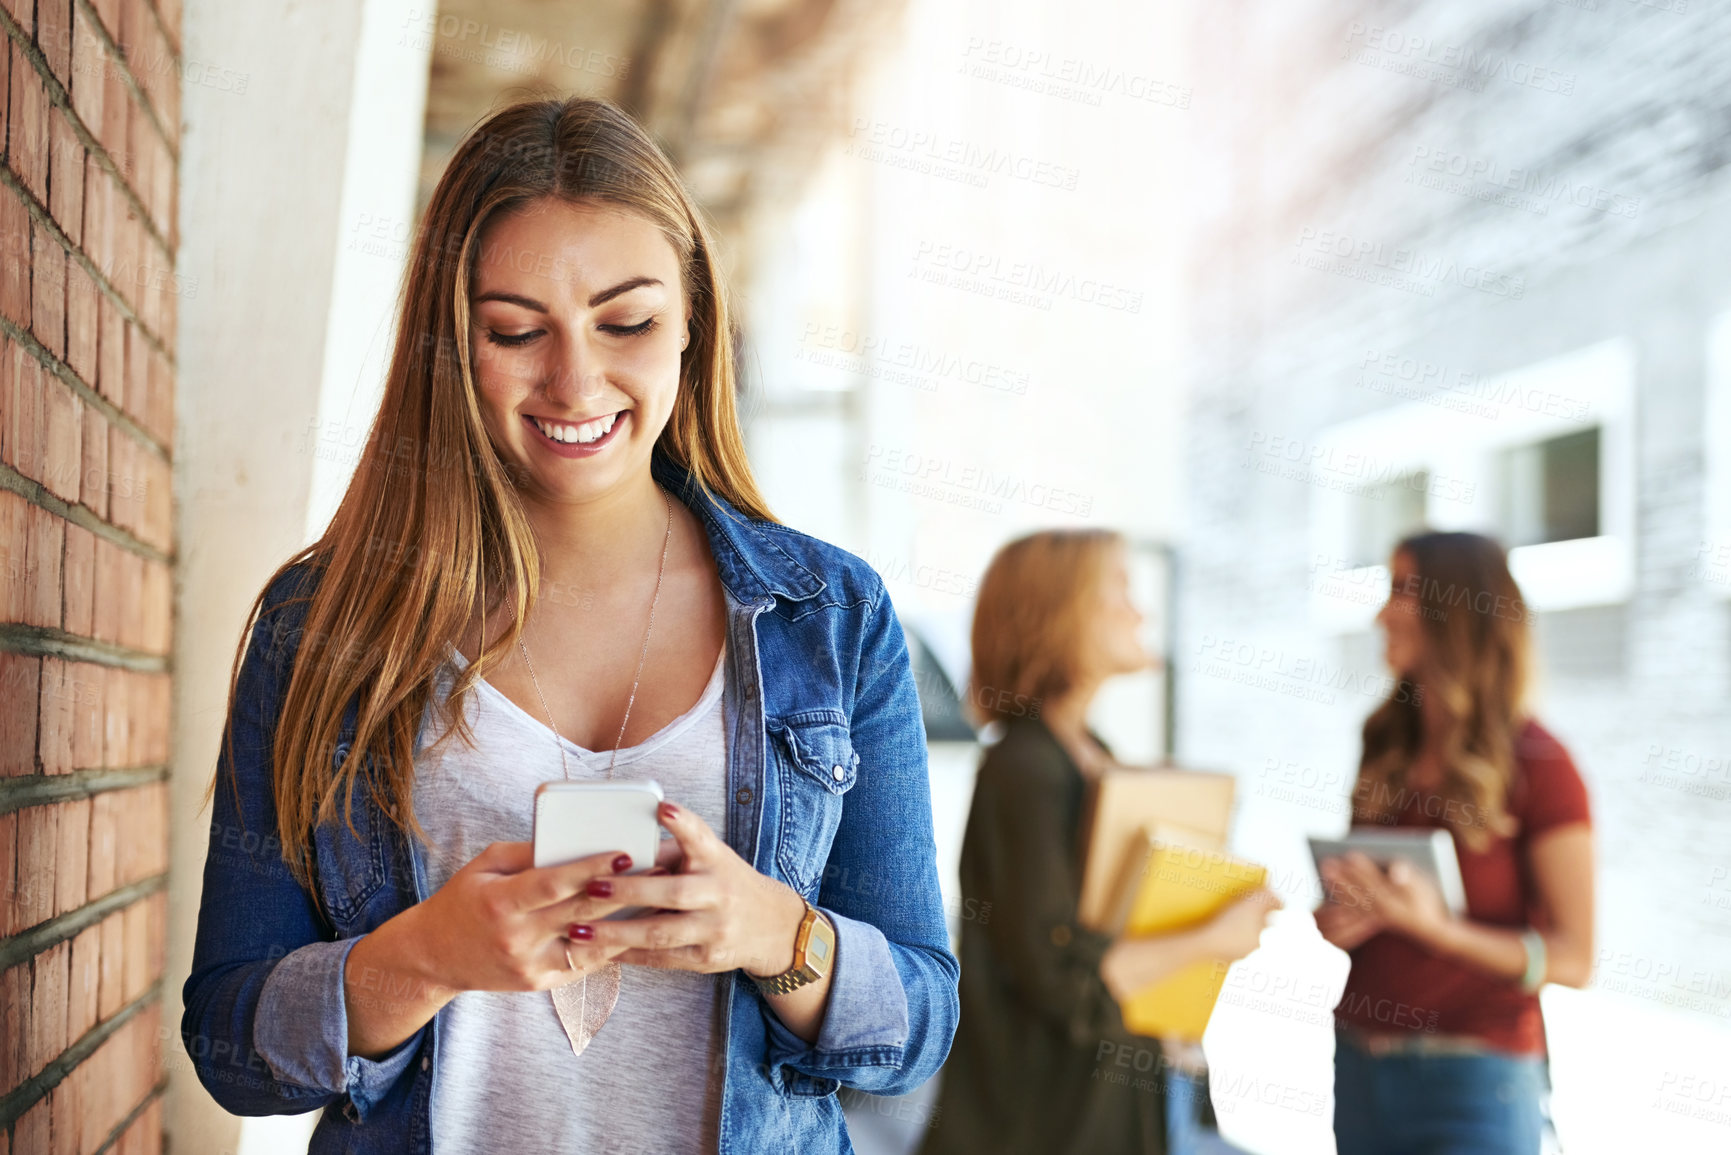 Buy stock photo Shot of a smiling female university student standing on campus using a cellphone with friends in the background